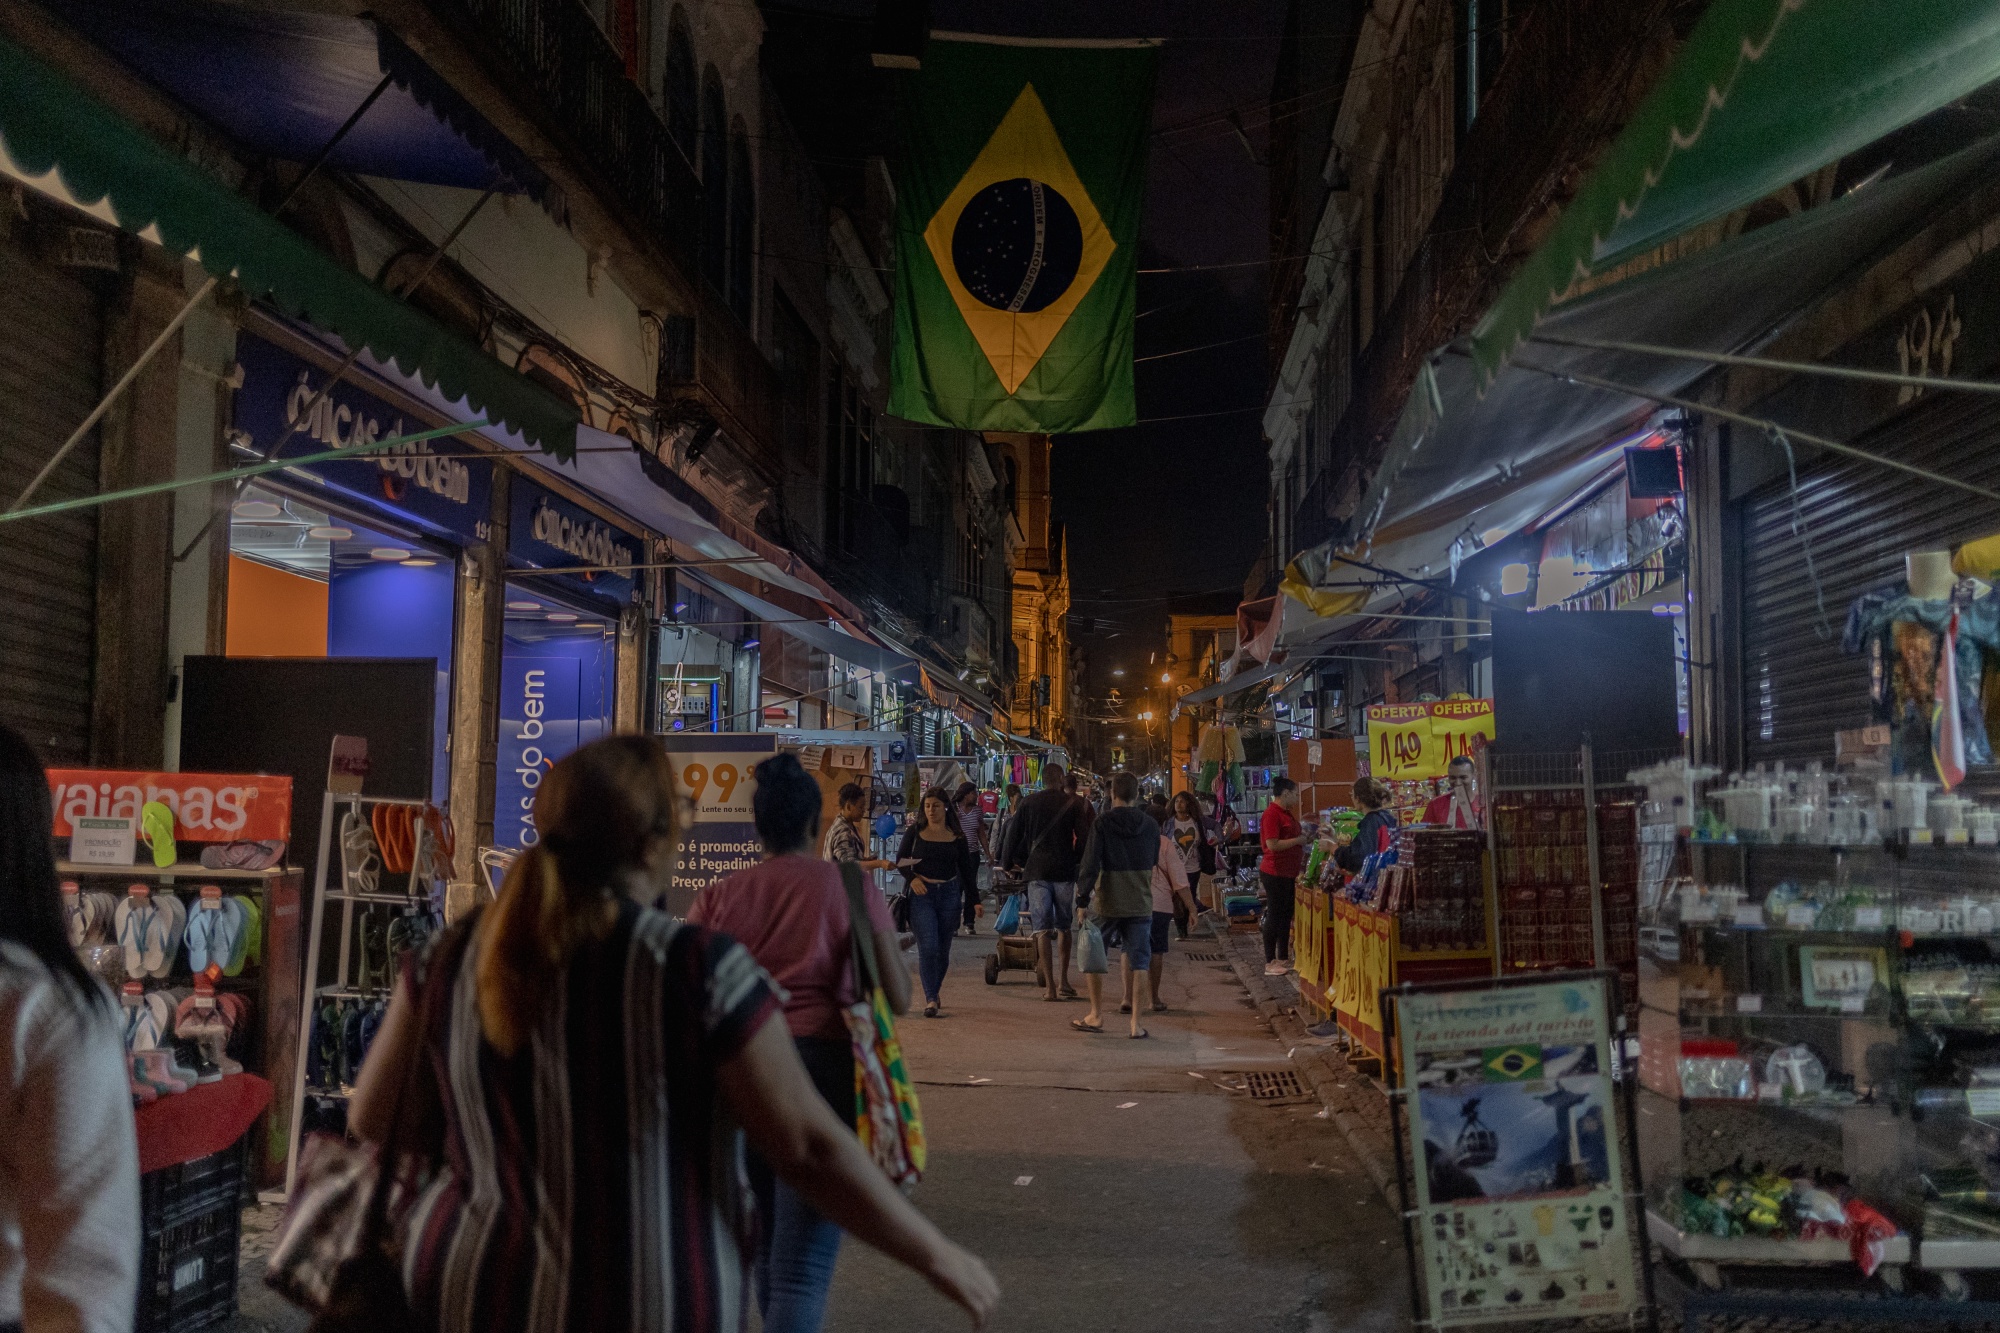 Expansion in Brazil Could Scramble Market